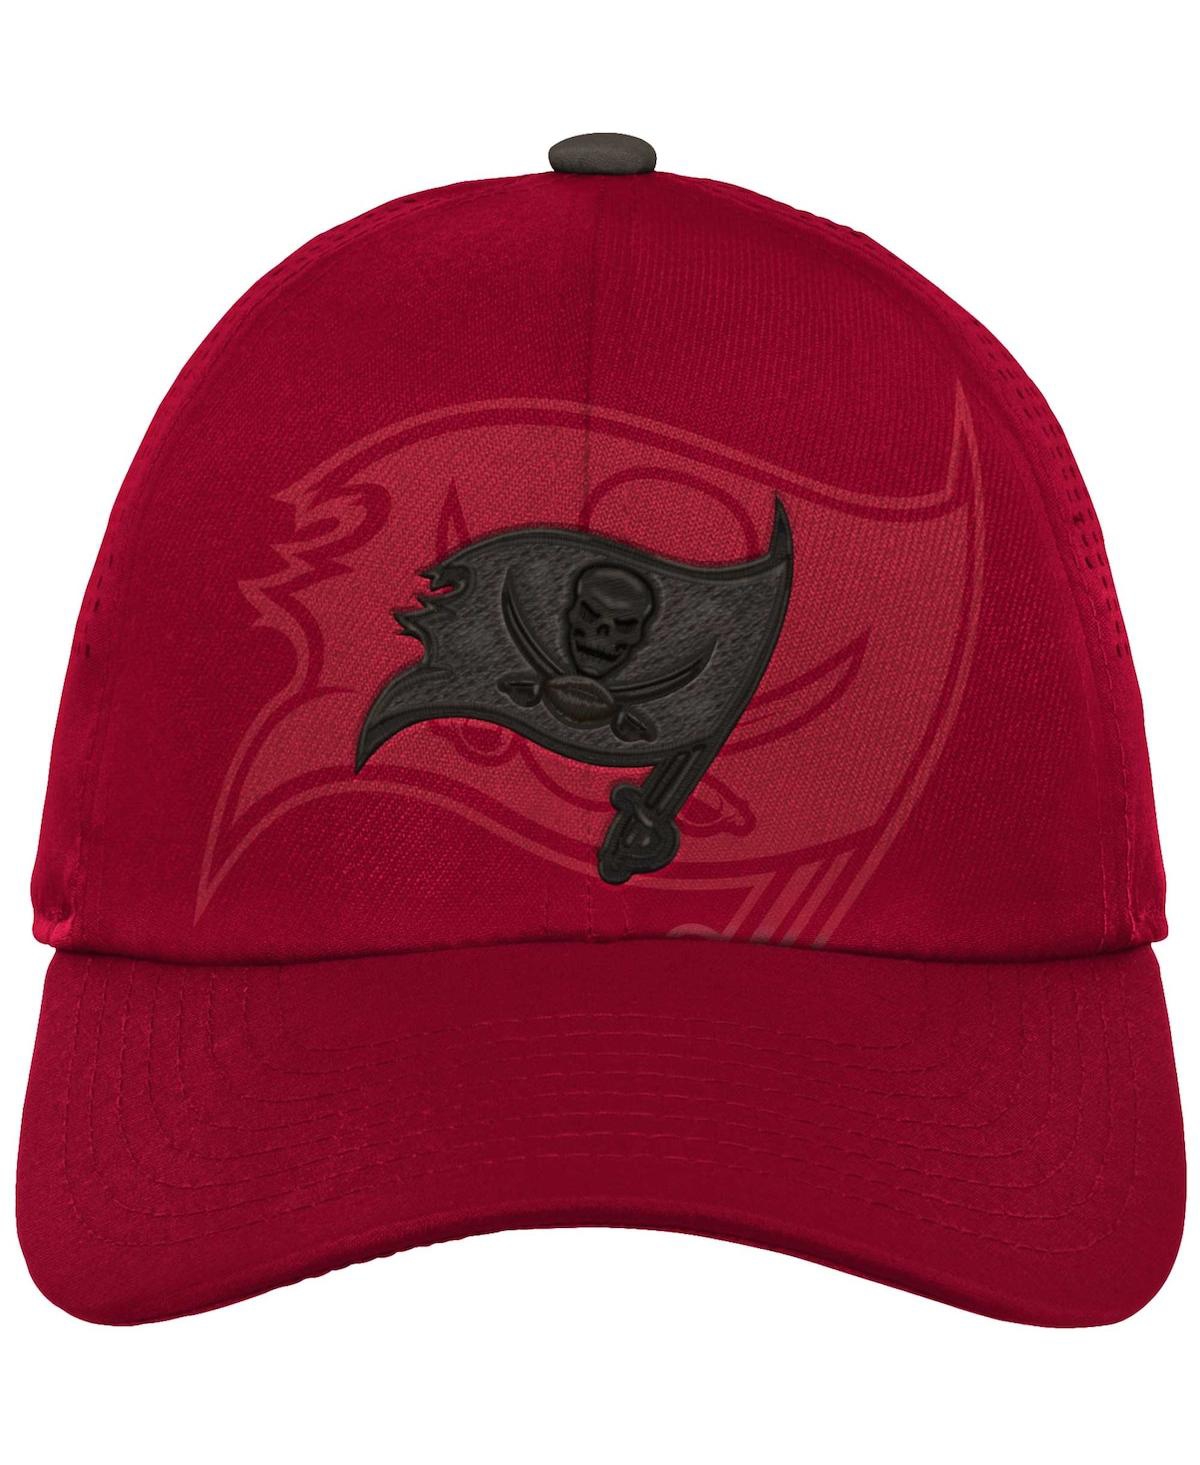 Shop Outerstuff Big Boys And Girls Red Tampa Bay Buccaneers Tailgate Adjustable Hat